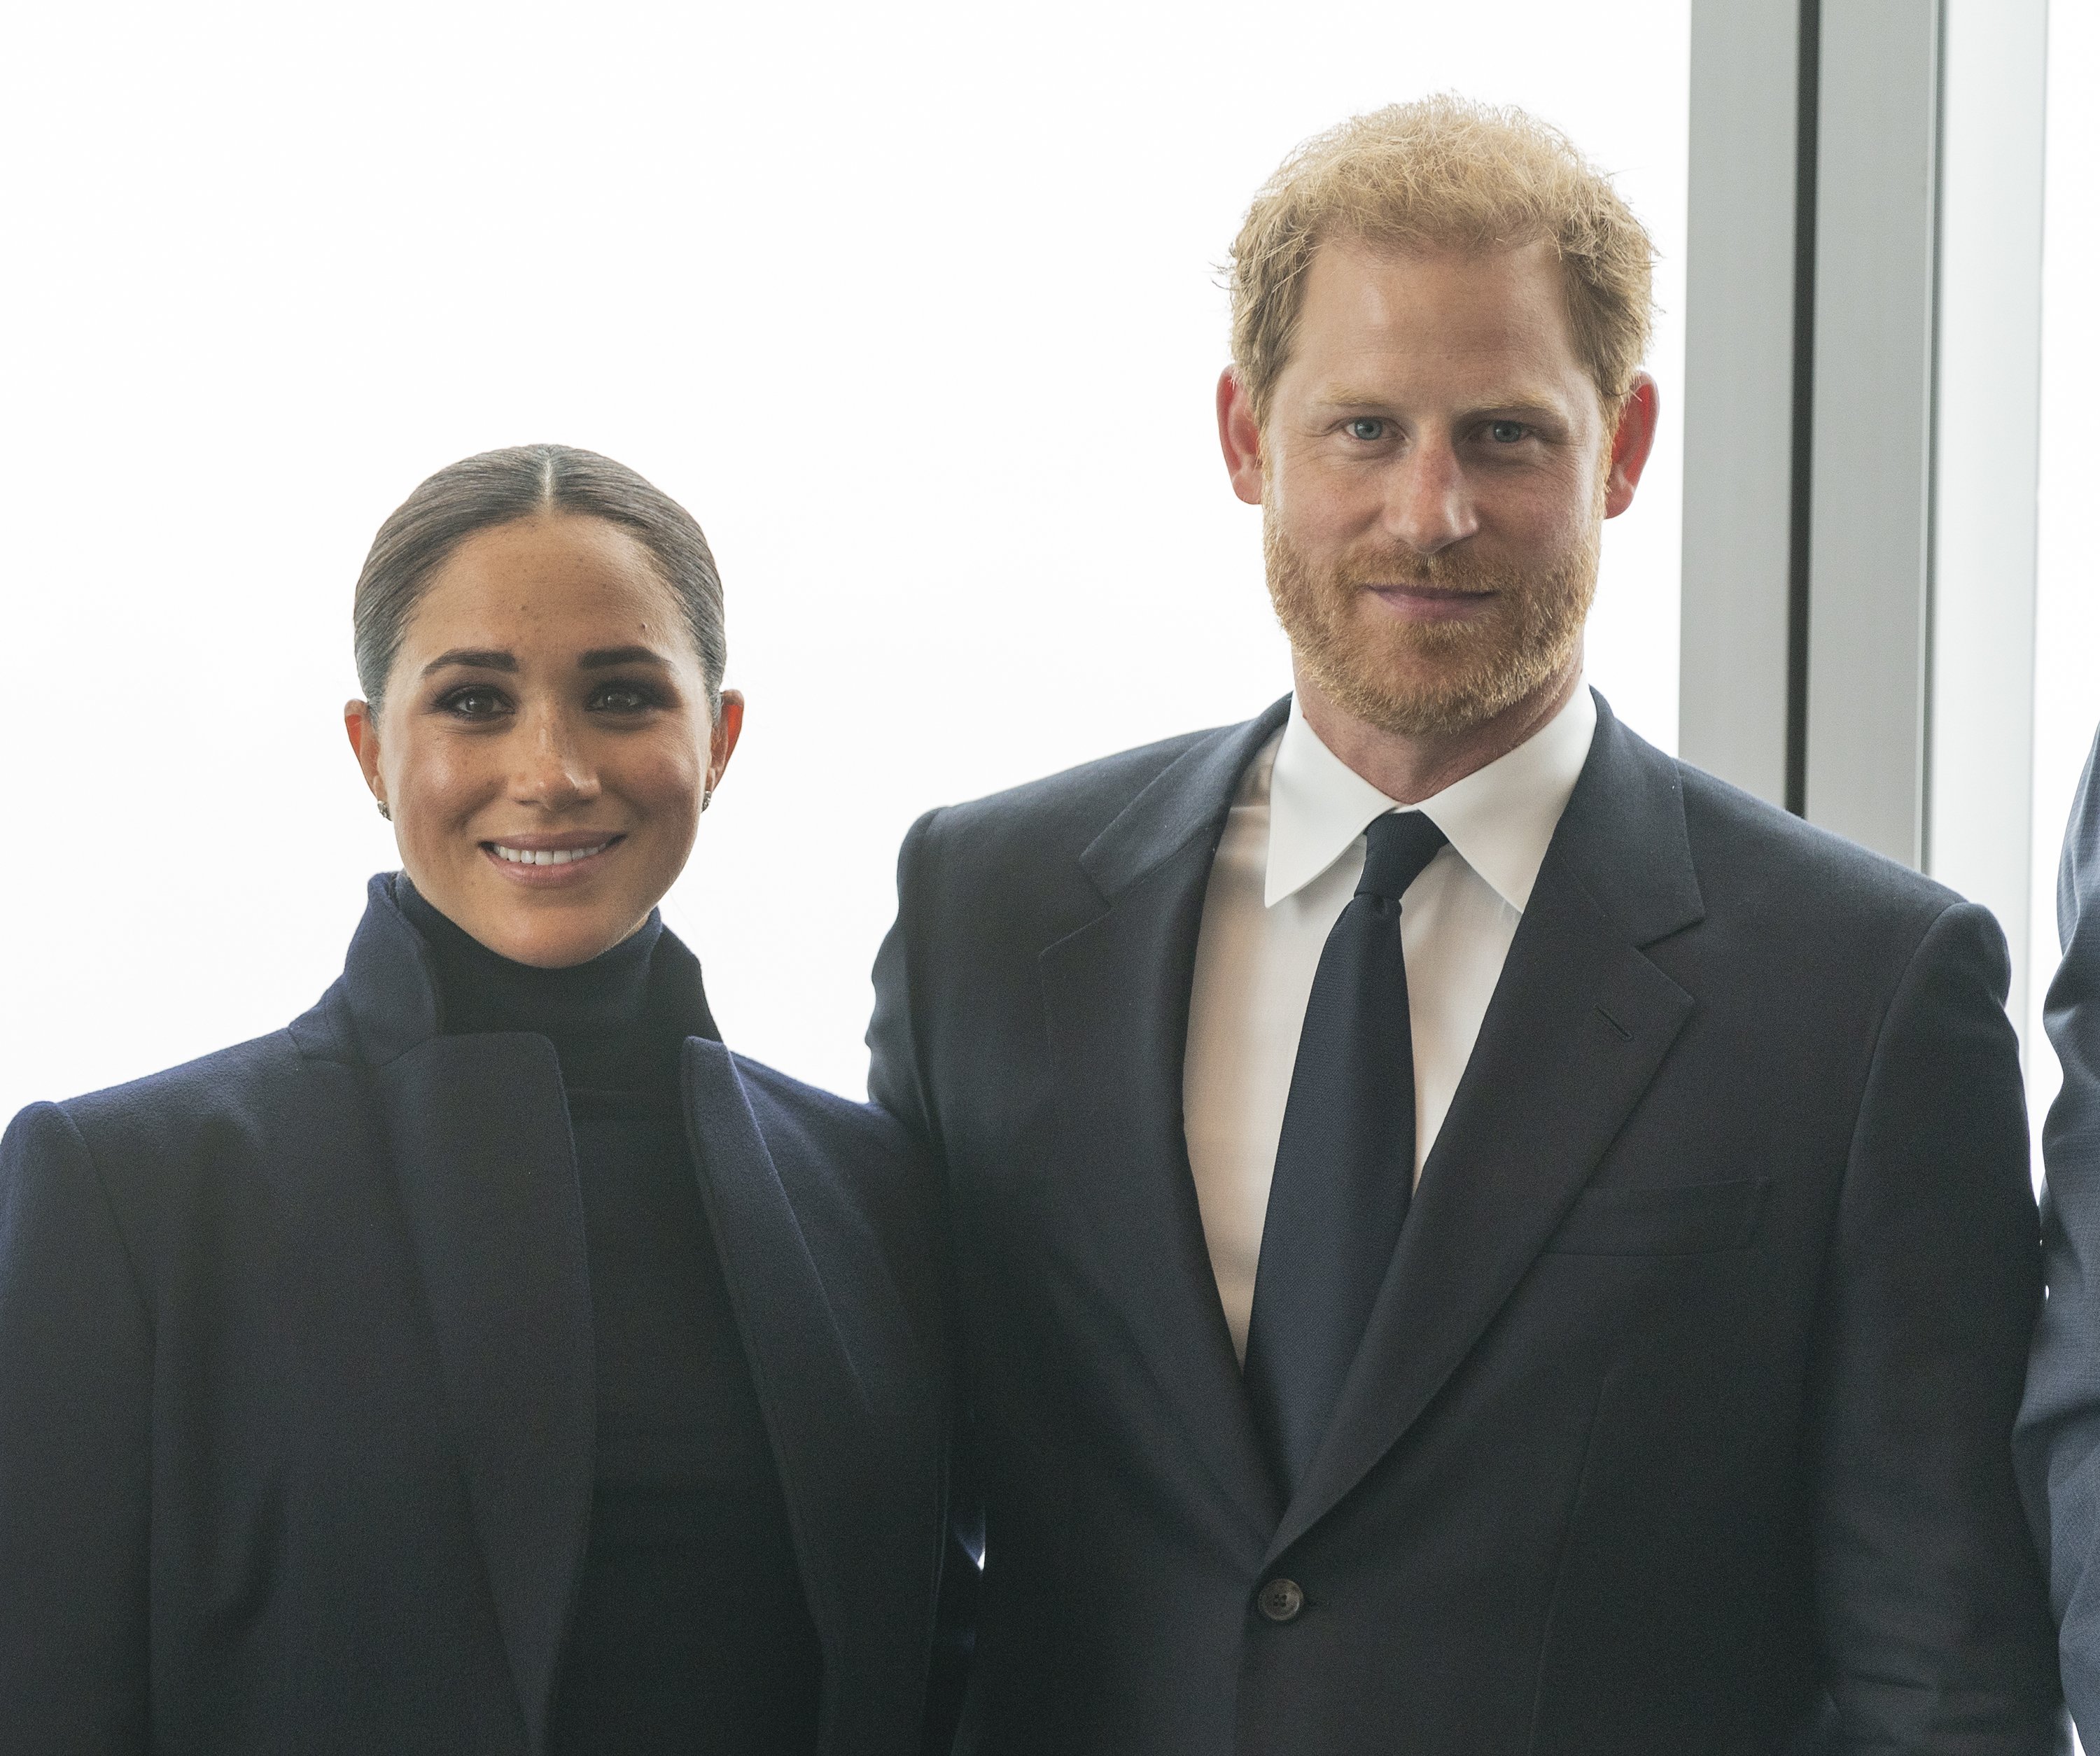 Meghan Markle and her husband Prince Harry pictured visiting One World Observatory on 102nd floor of Freedom Tower of World Trade Center | Source: Getty Images